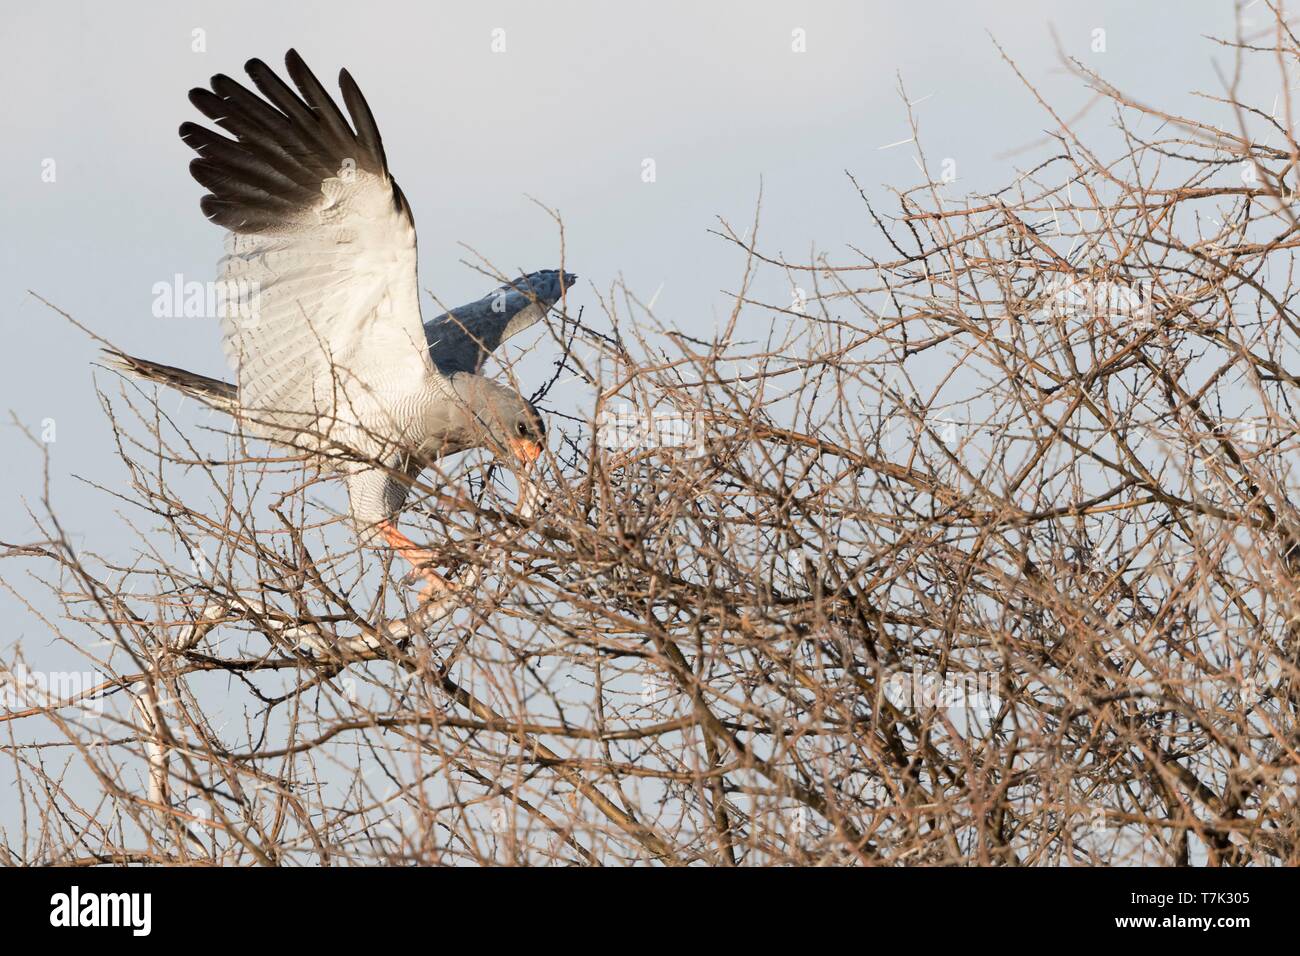 Bostwana, Central Kalahari Game Reserve, Pale chanting goshawk (Melierax canorus), adult perched on a tree with a prey a snake Stock Photo